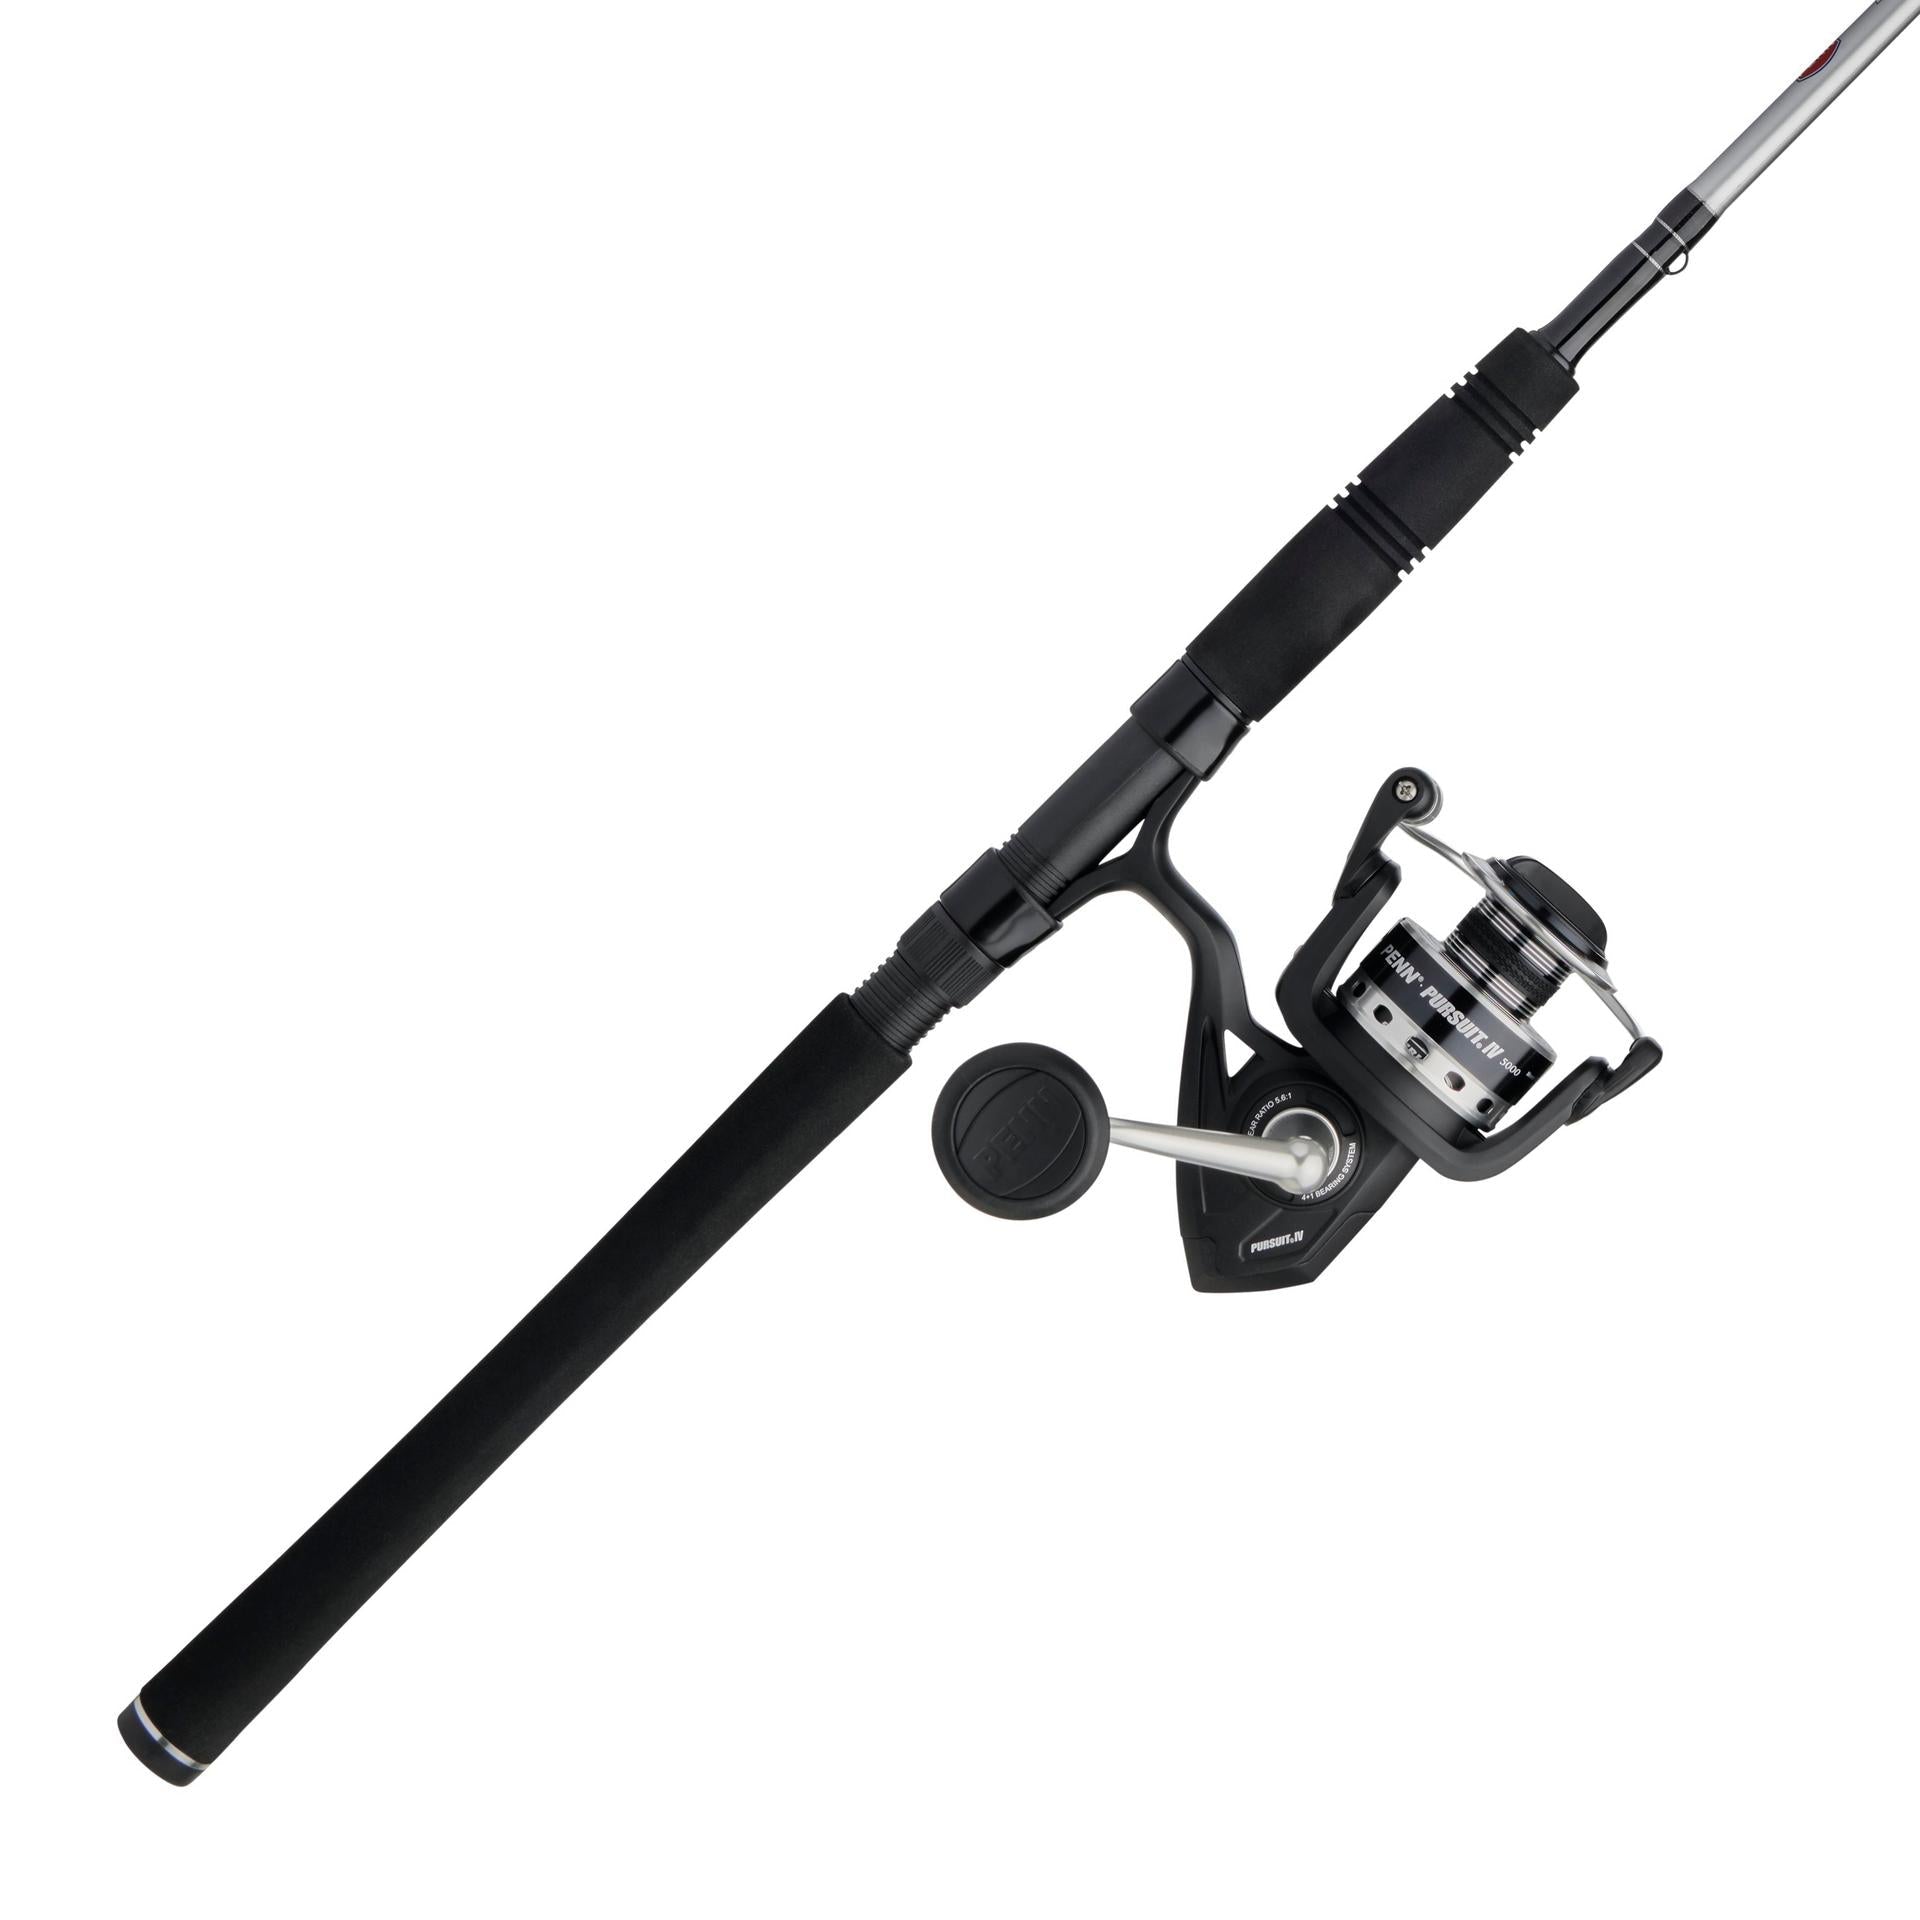 Simply Fishing Ladies Spinning Fishing Rod and Reel Combo with